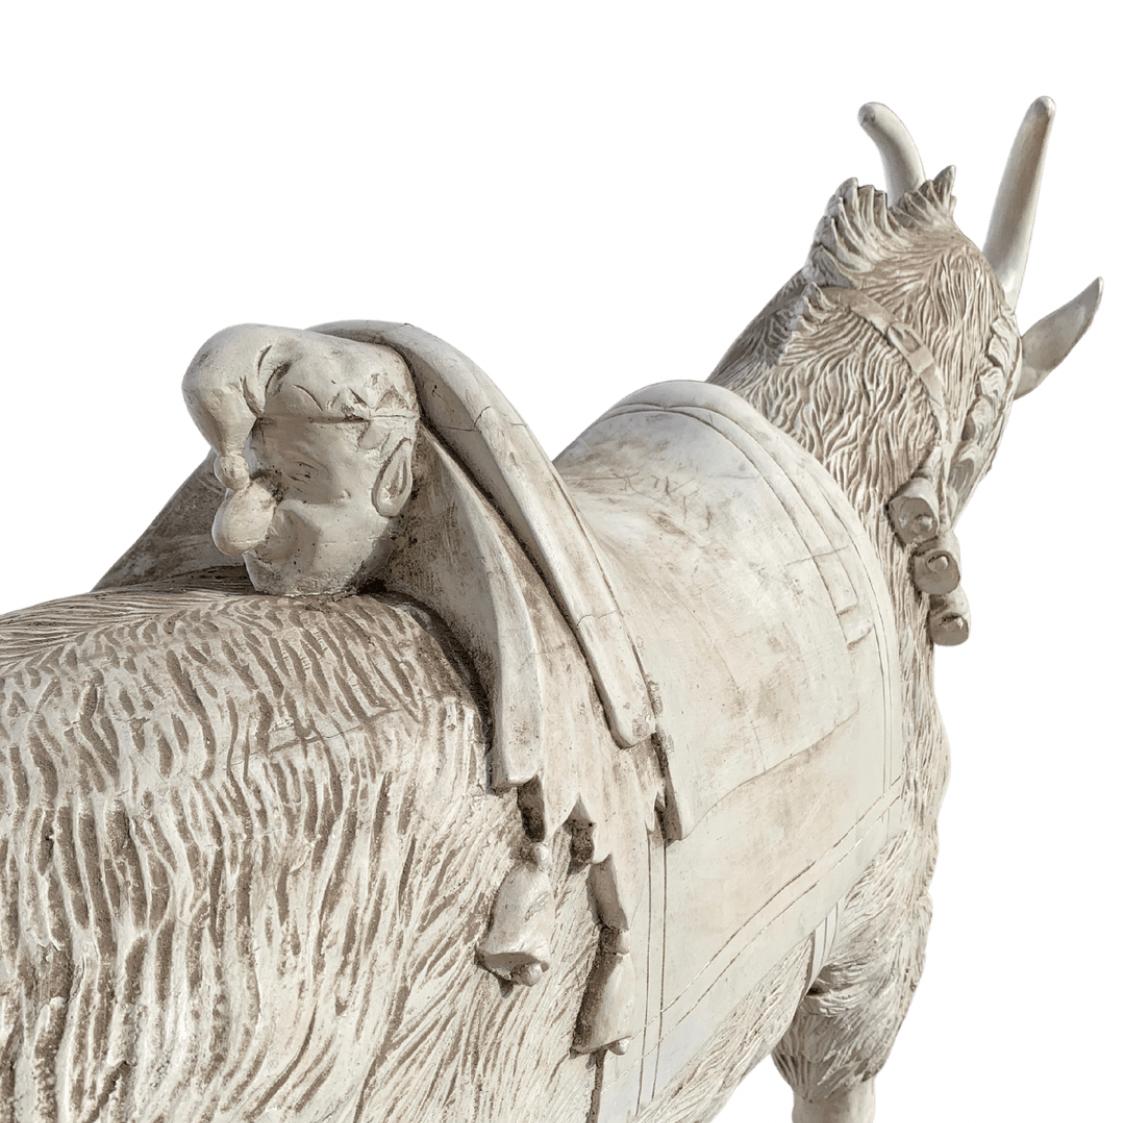 Full size wooden carousel goat with Punchinello carved on the back of the saddle. Punch was one of the turn-of-the -century’s most popular characters known to most children.
Carved in the style of DC Muller Brothers, carousel carvers from